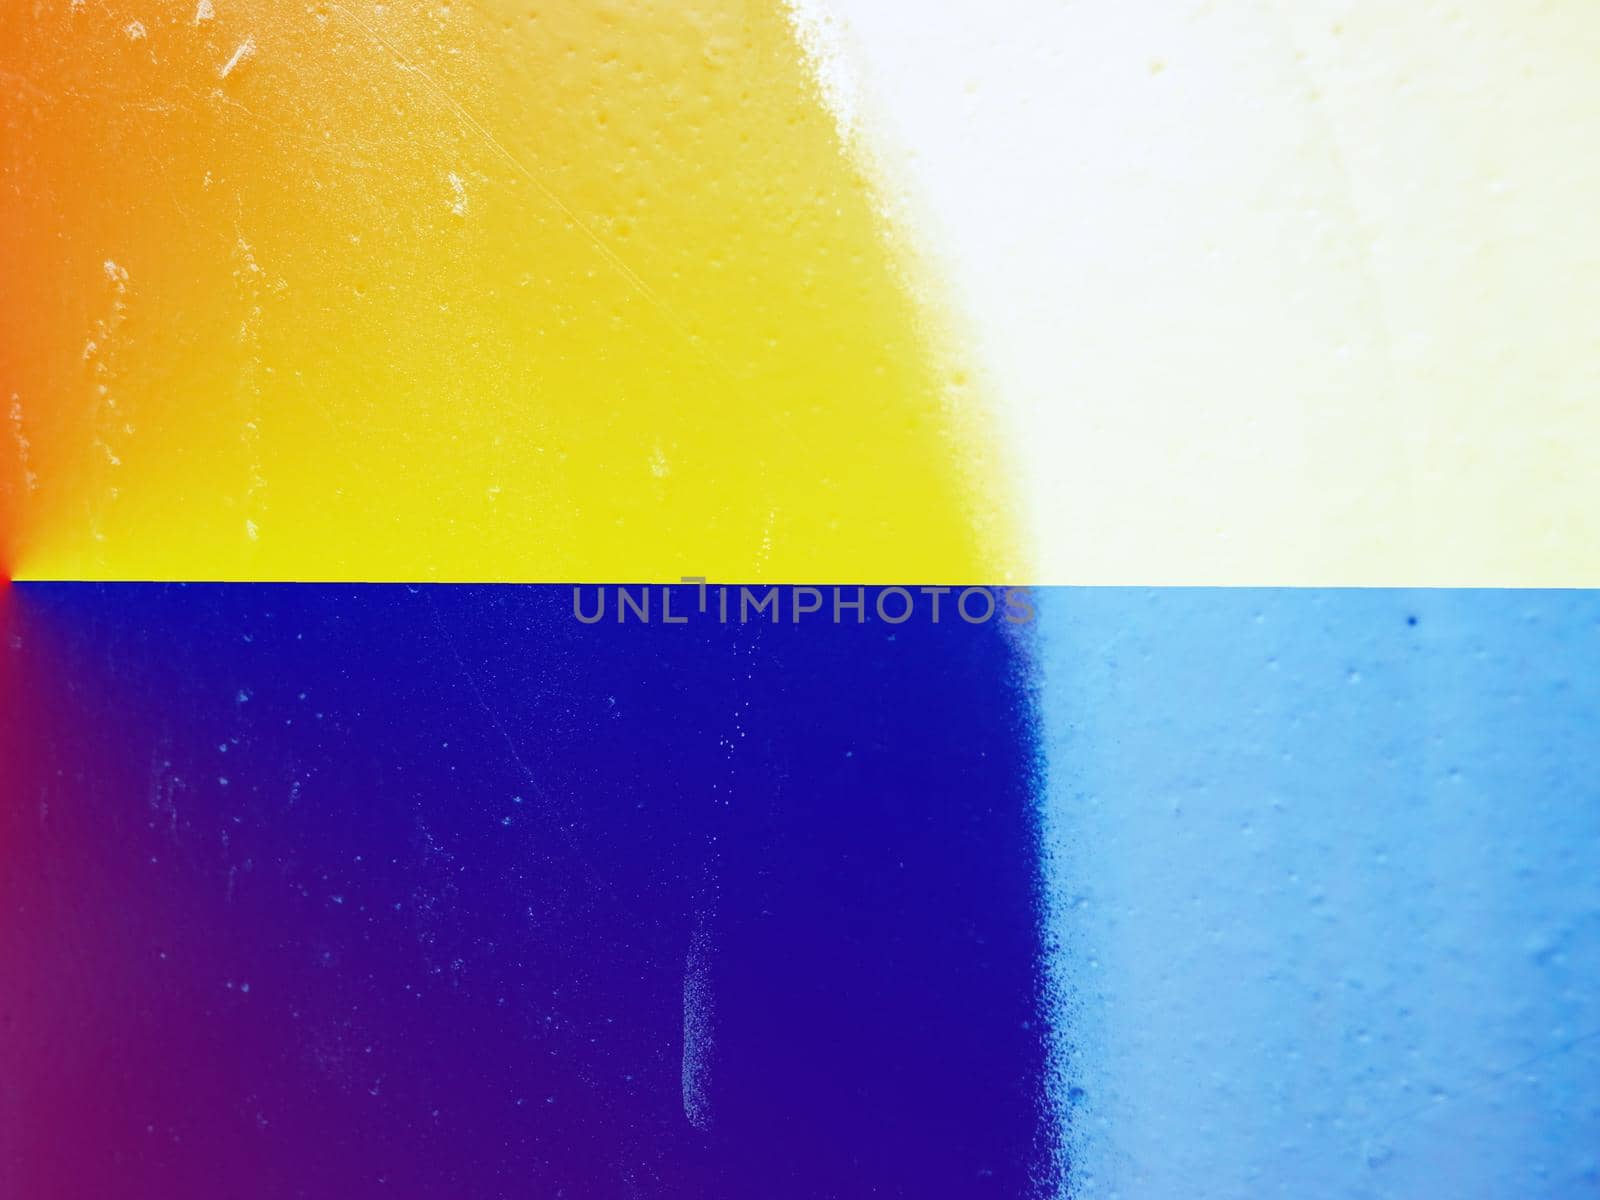 Closeup of colorful texture and background in Ukraine flag color - yellow and blue. Ukraine flag paint shading with image of national flag. Independence Day banner background style.